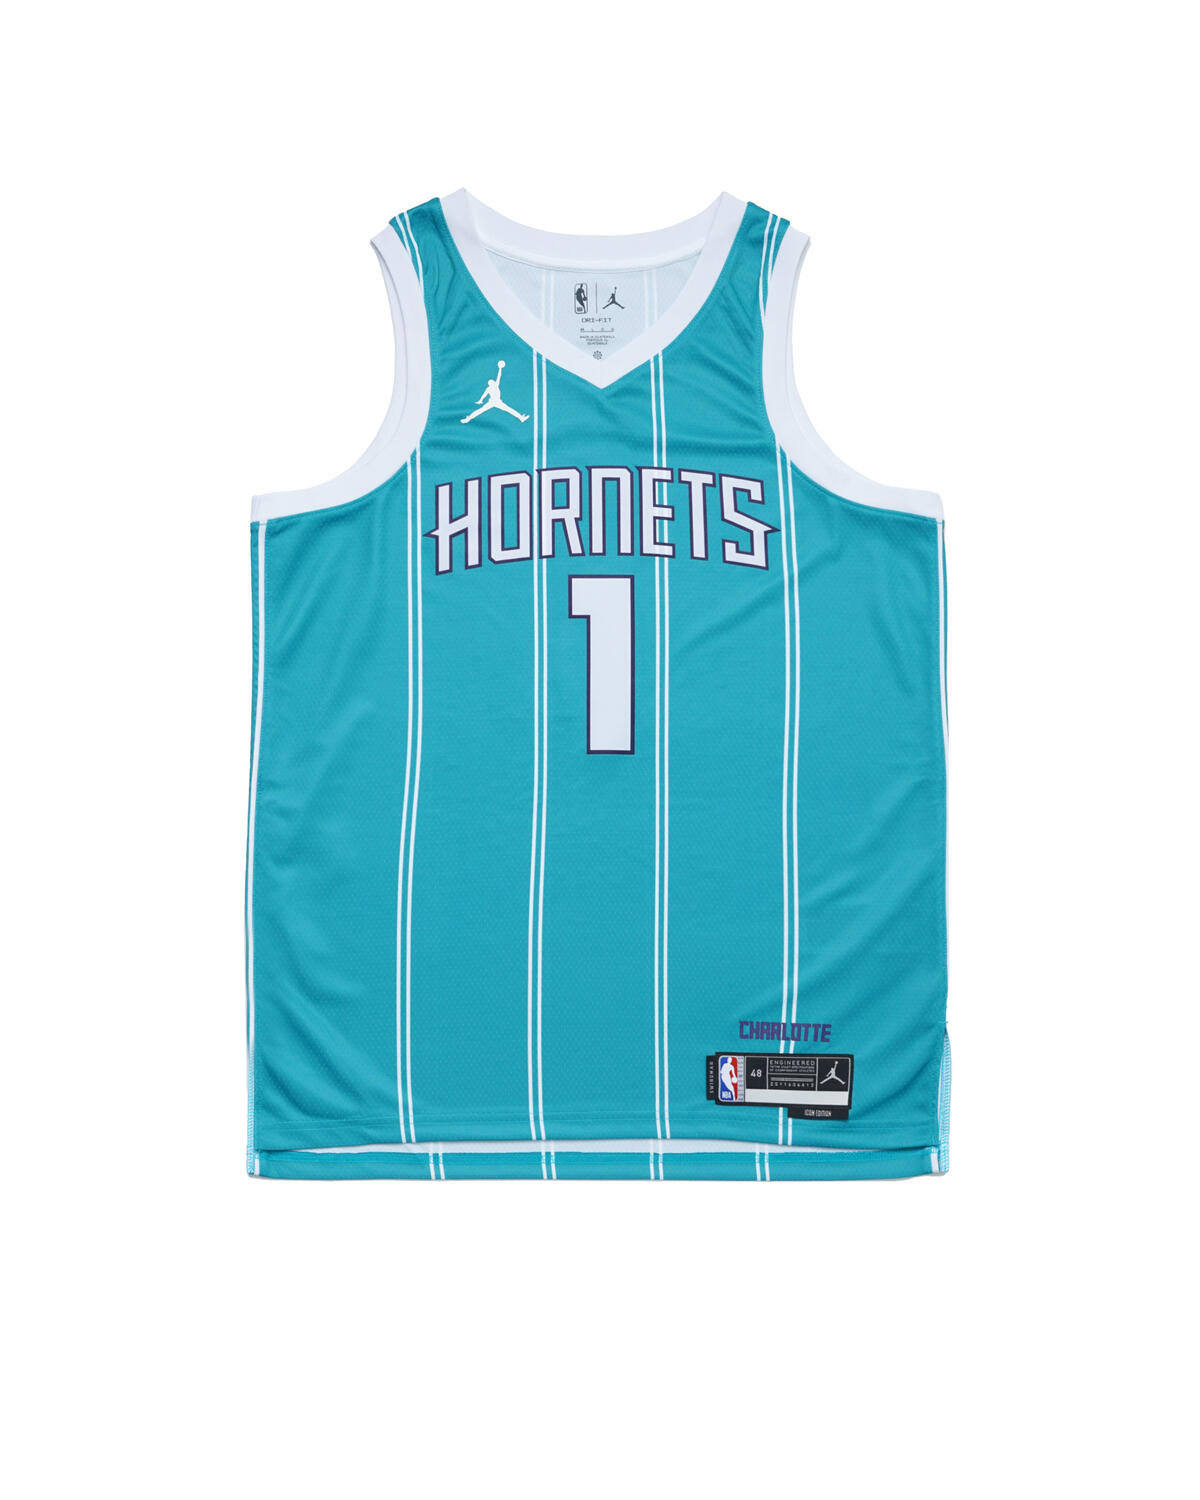 Nike CHARLOTTE HORNETS JERSEY Lamelo Ball ICON EDITION, DN1998-415